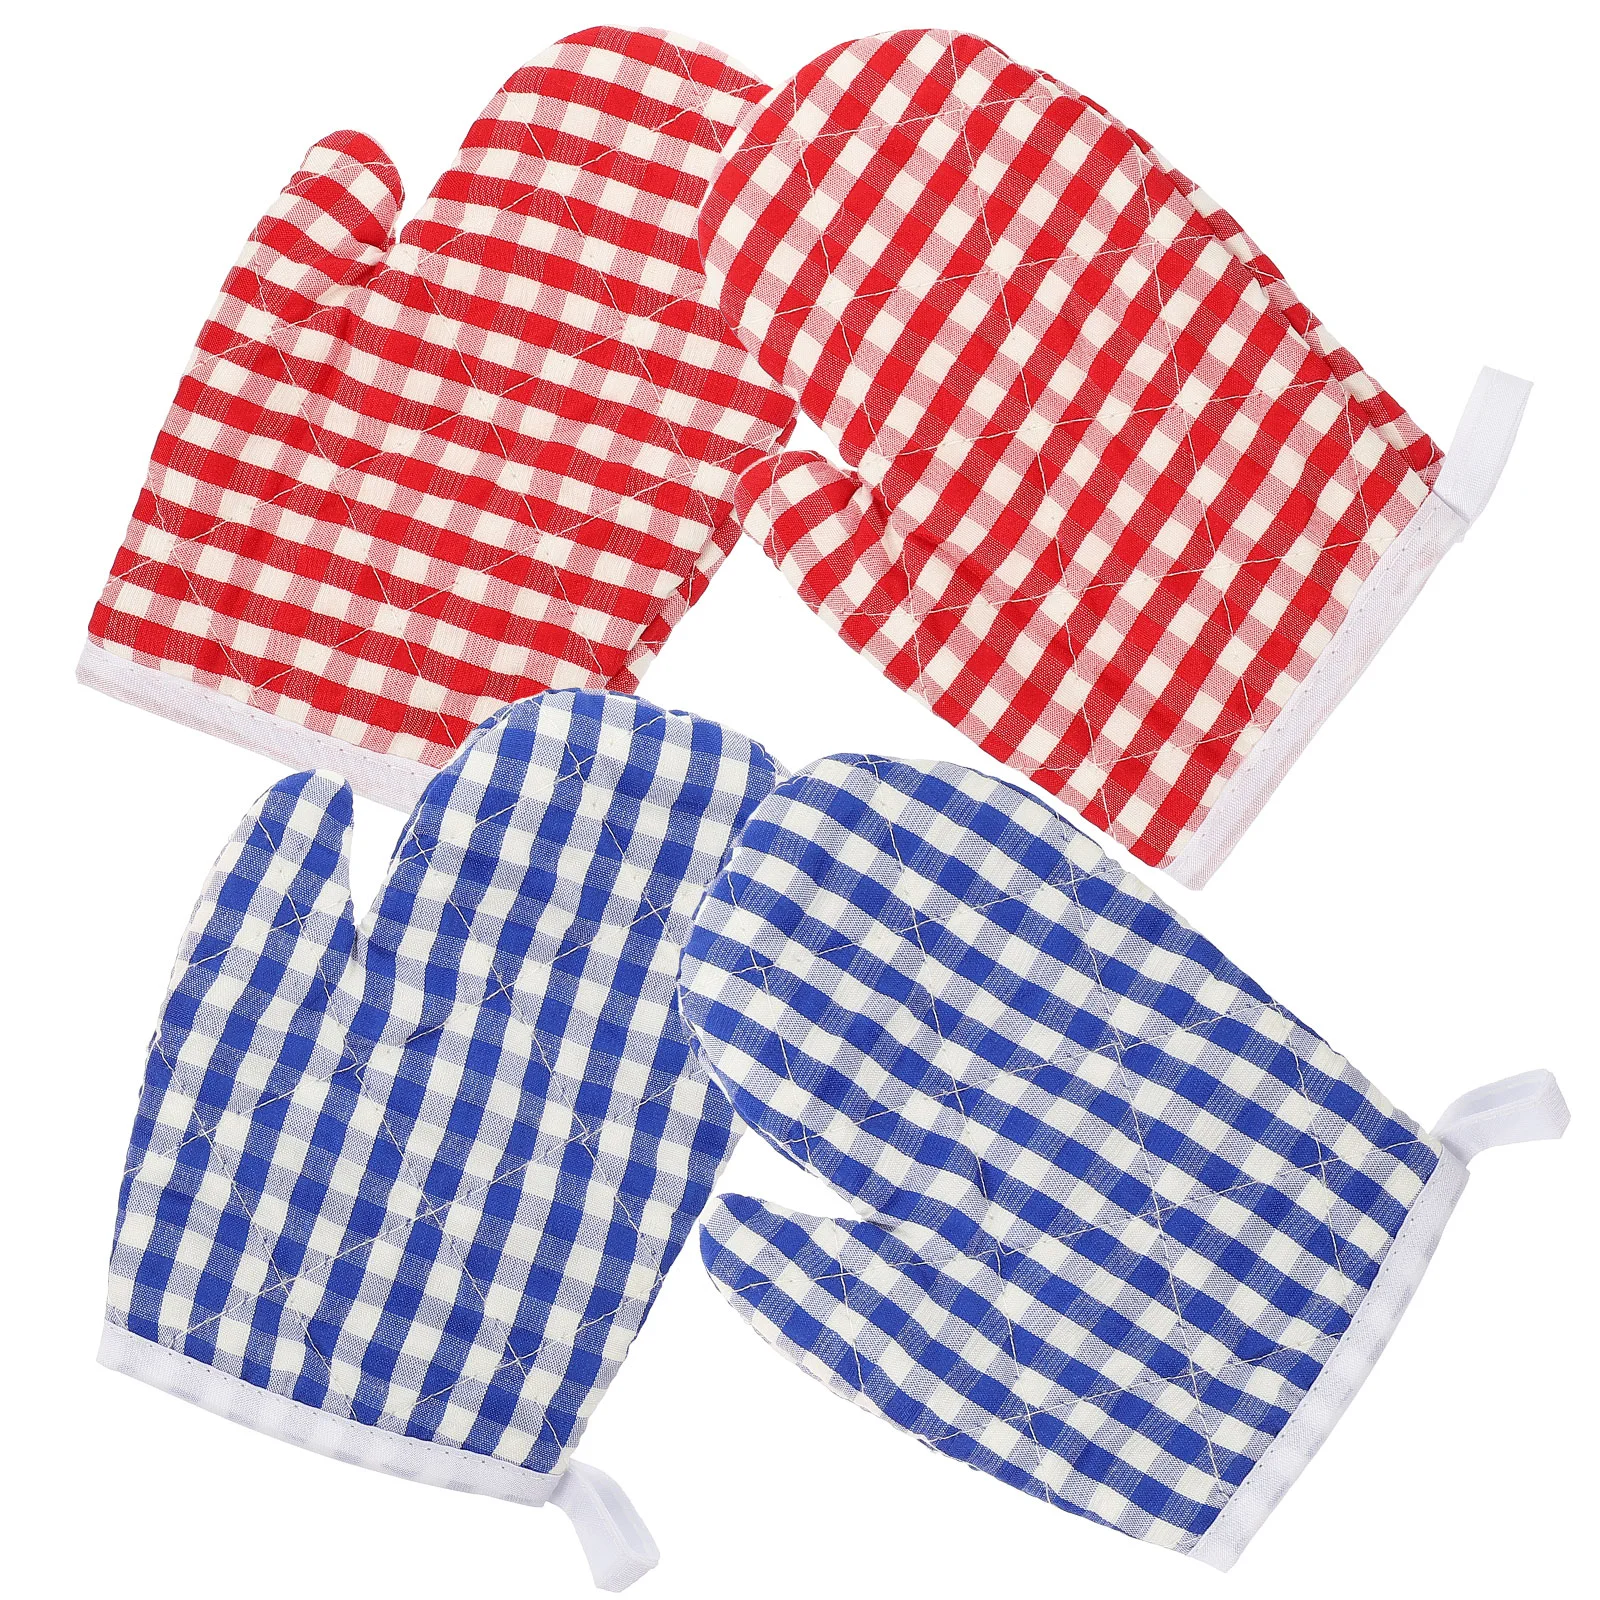 

Grilling Oven Mitts Insulation Gloves Kids Waterproof Suit Kitchen Anti-scalding